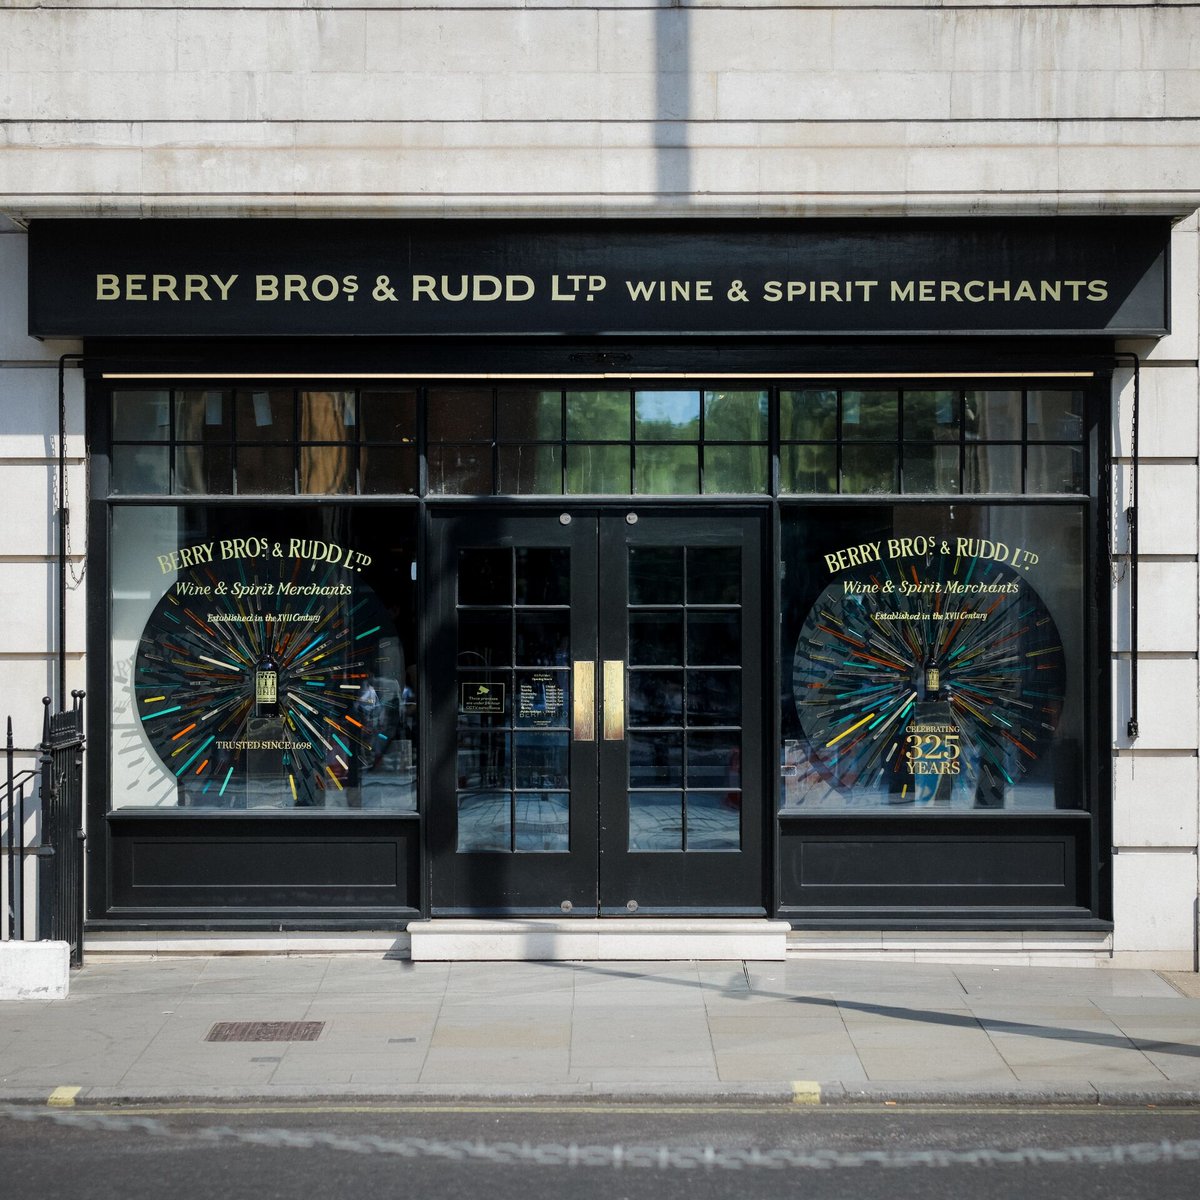 The current windows of our London Shop: celebrating 325 years of Berry Bros. & Rudd.